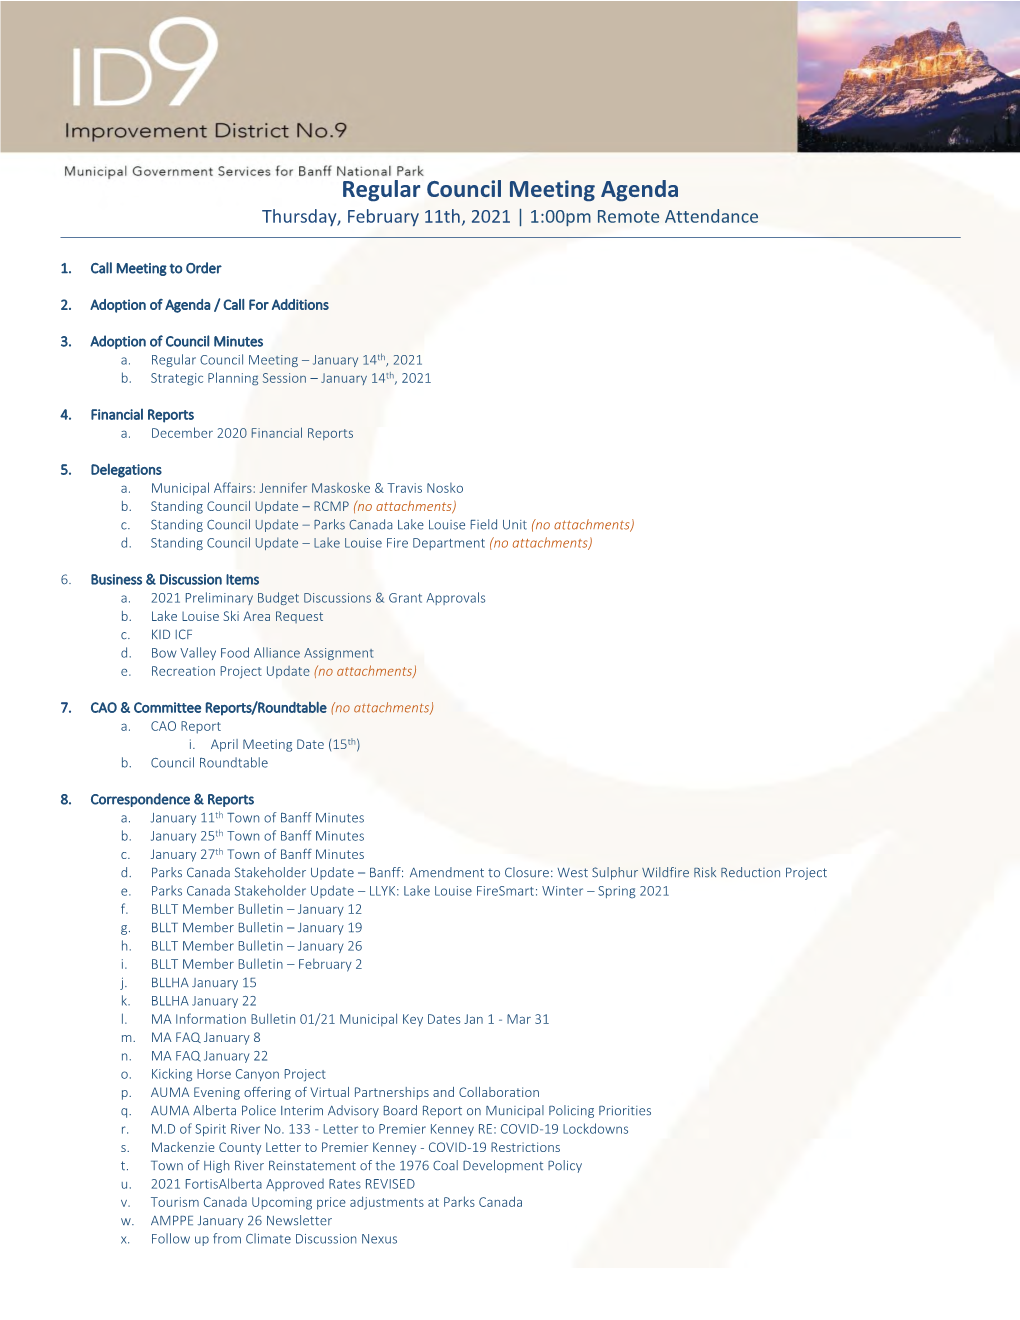 Regular Council Meeting Agenda Thursday, February 11Th, 2021 | 1:00Pm Remote Attendance